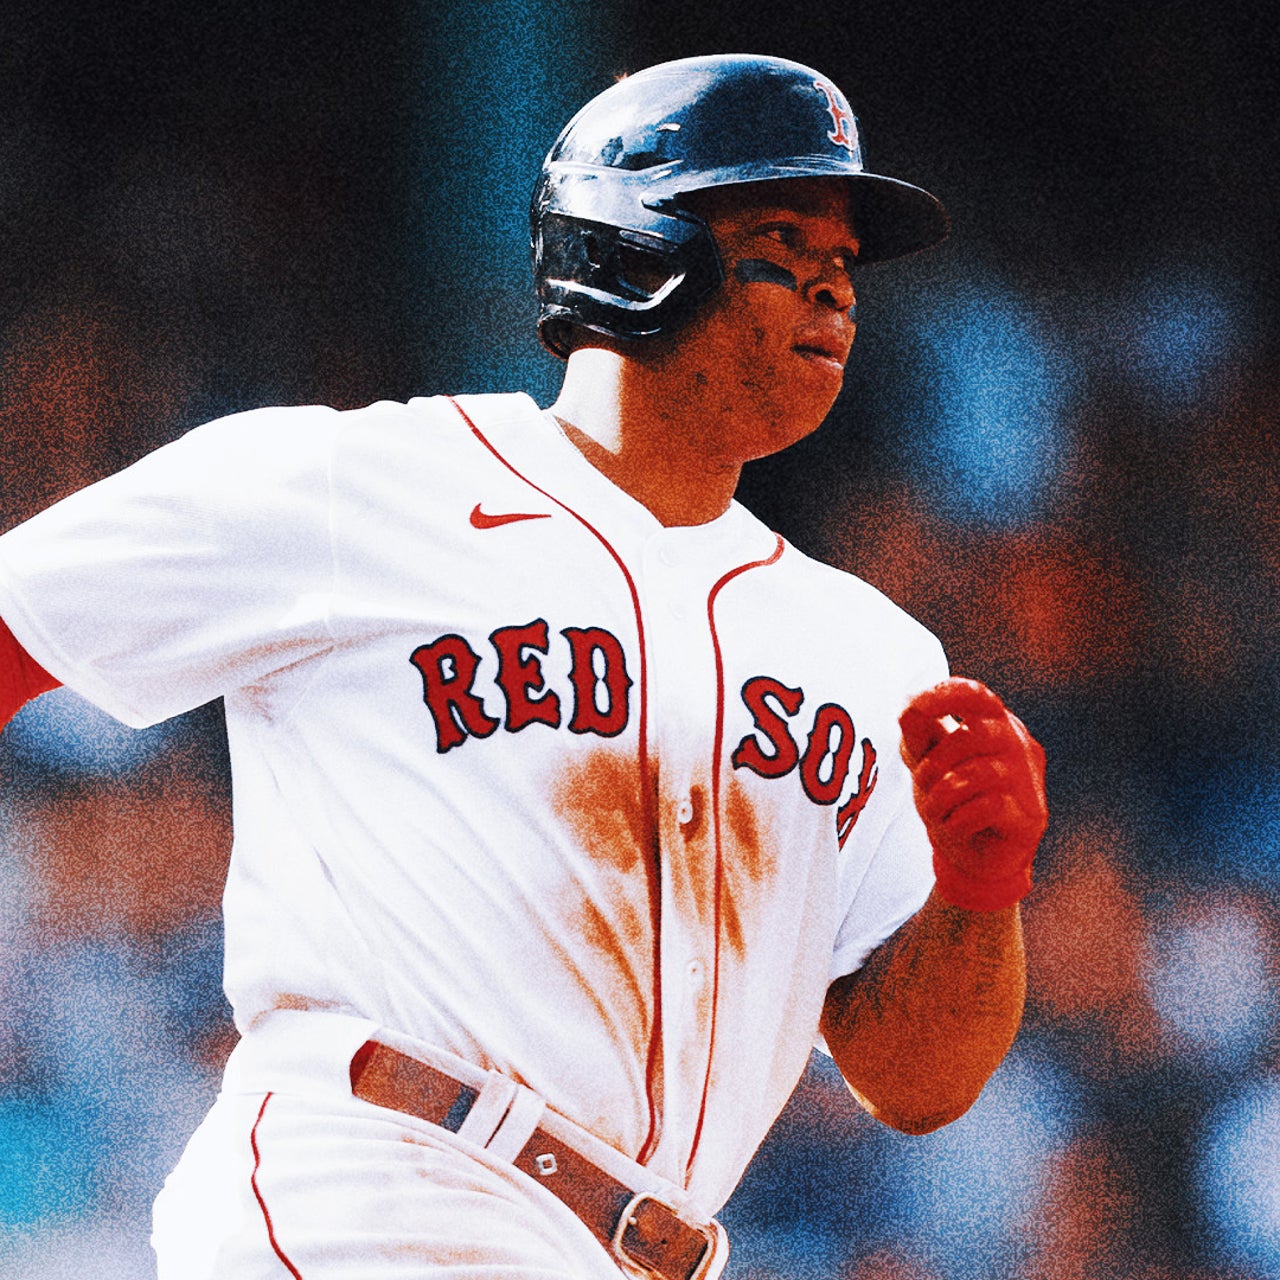 Red Sox, Rafael Devers agree to 11-year, $331 million contract extension